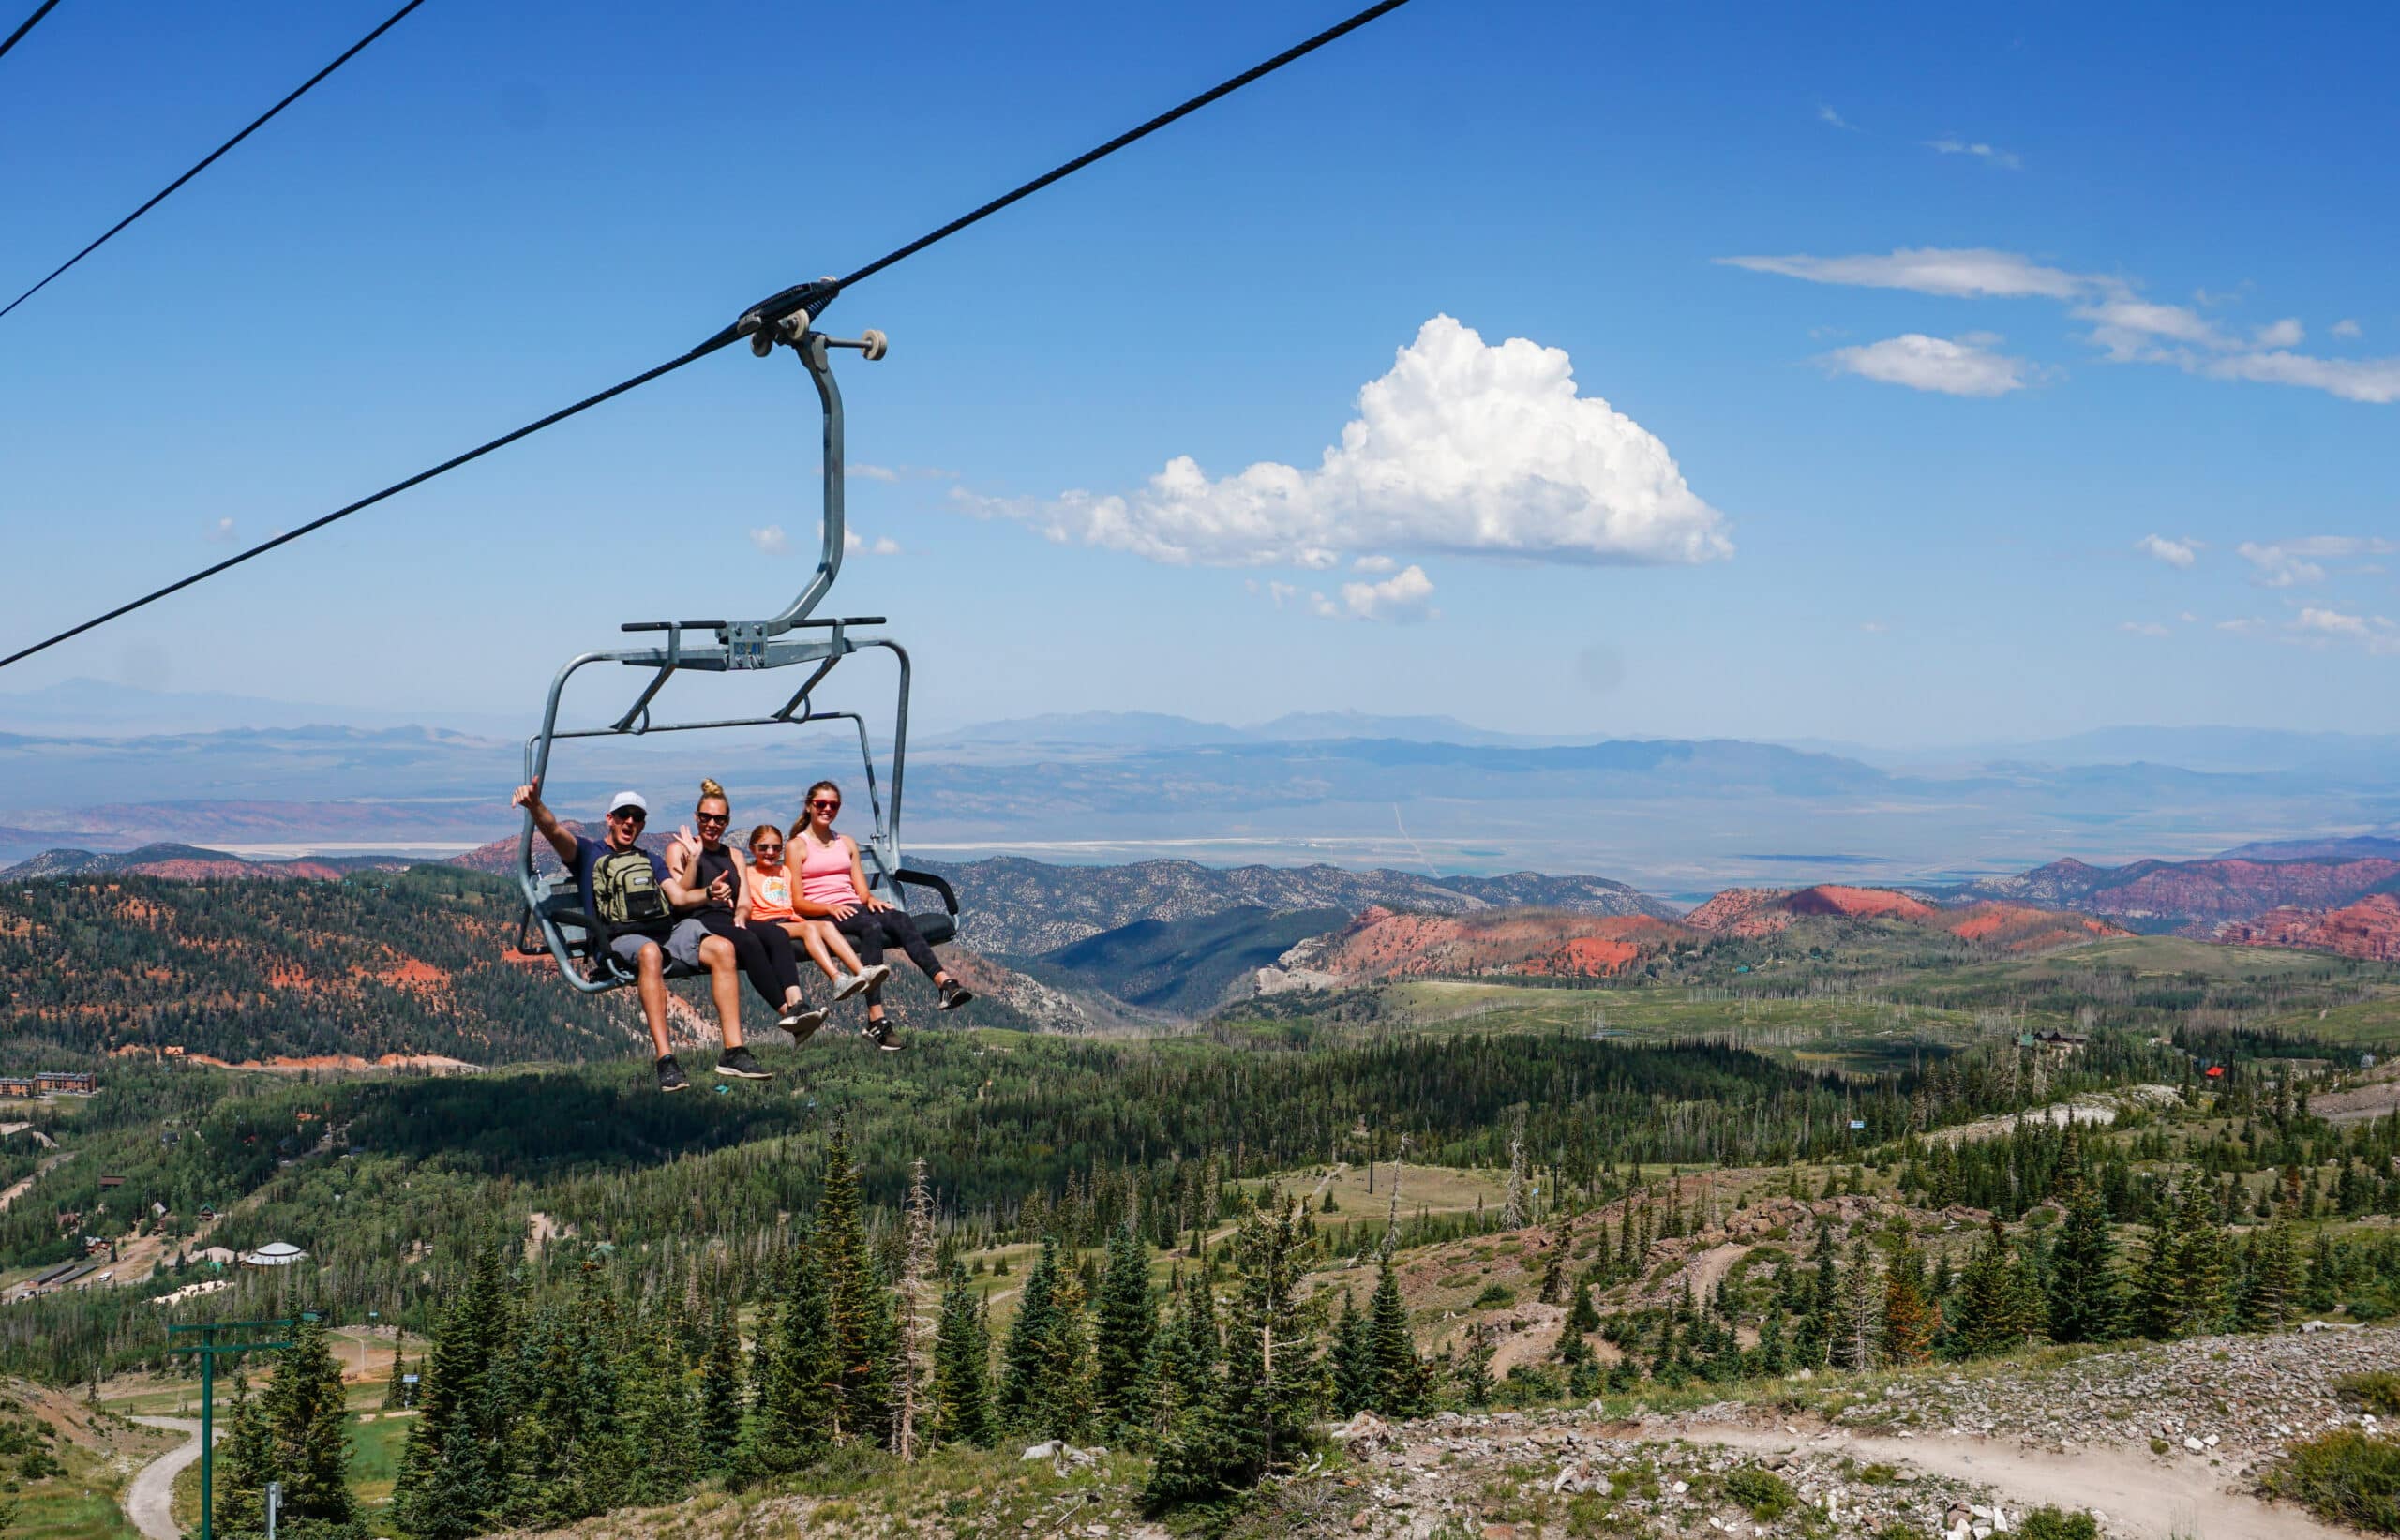 Scenic Chair Ride on Giant Steps Express Lift in Summer